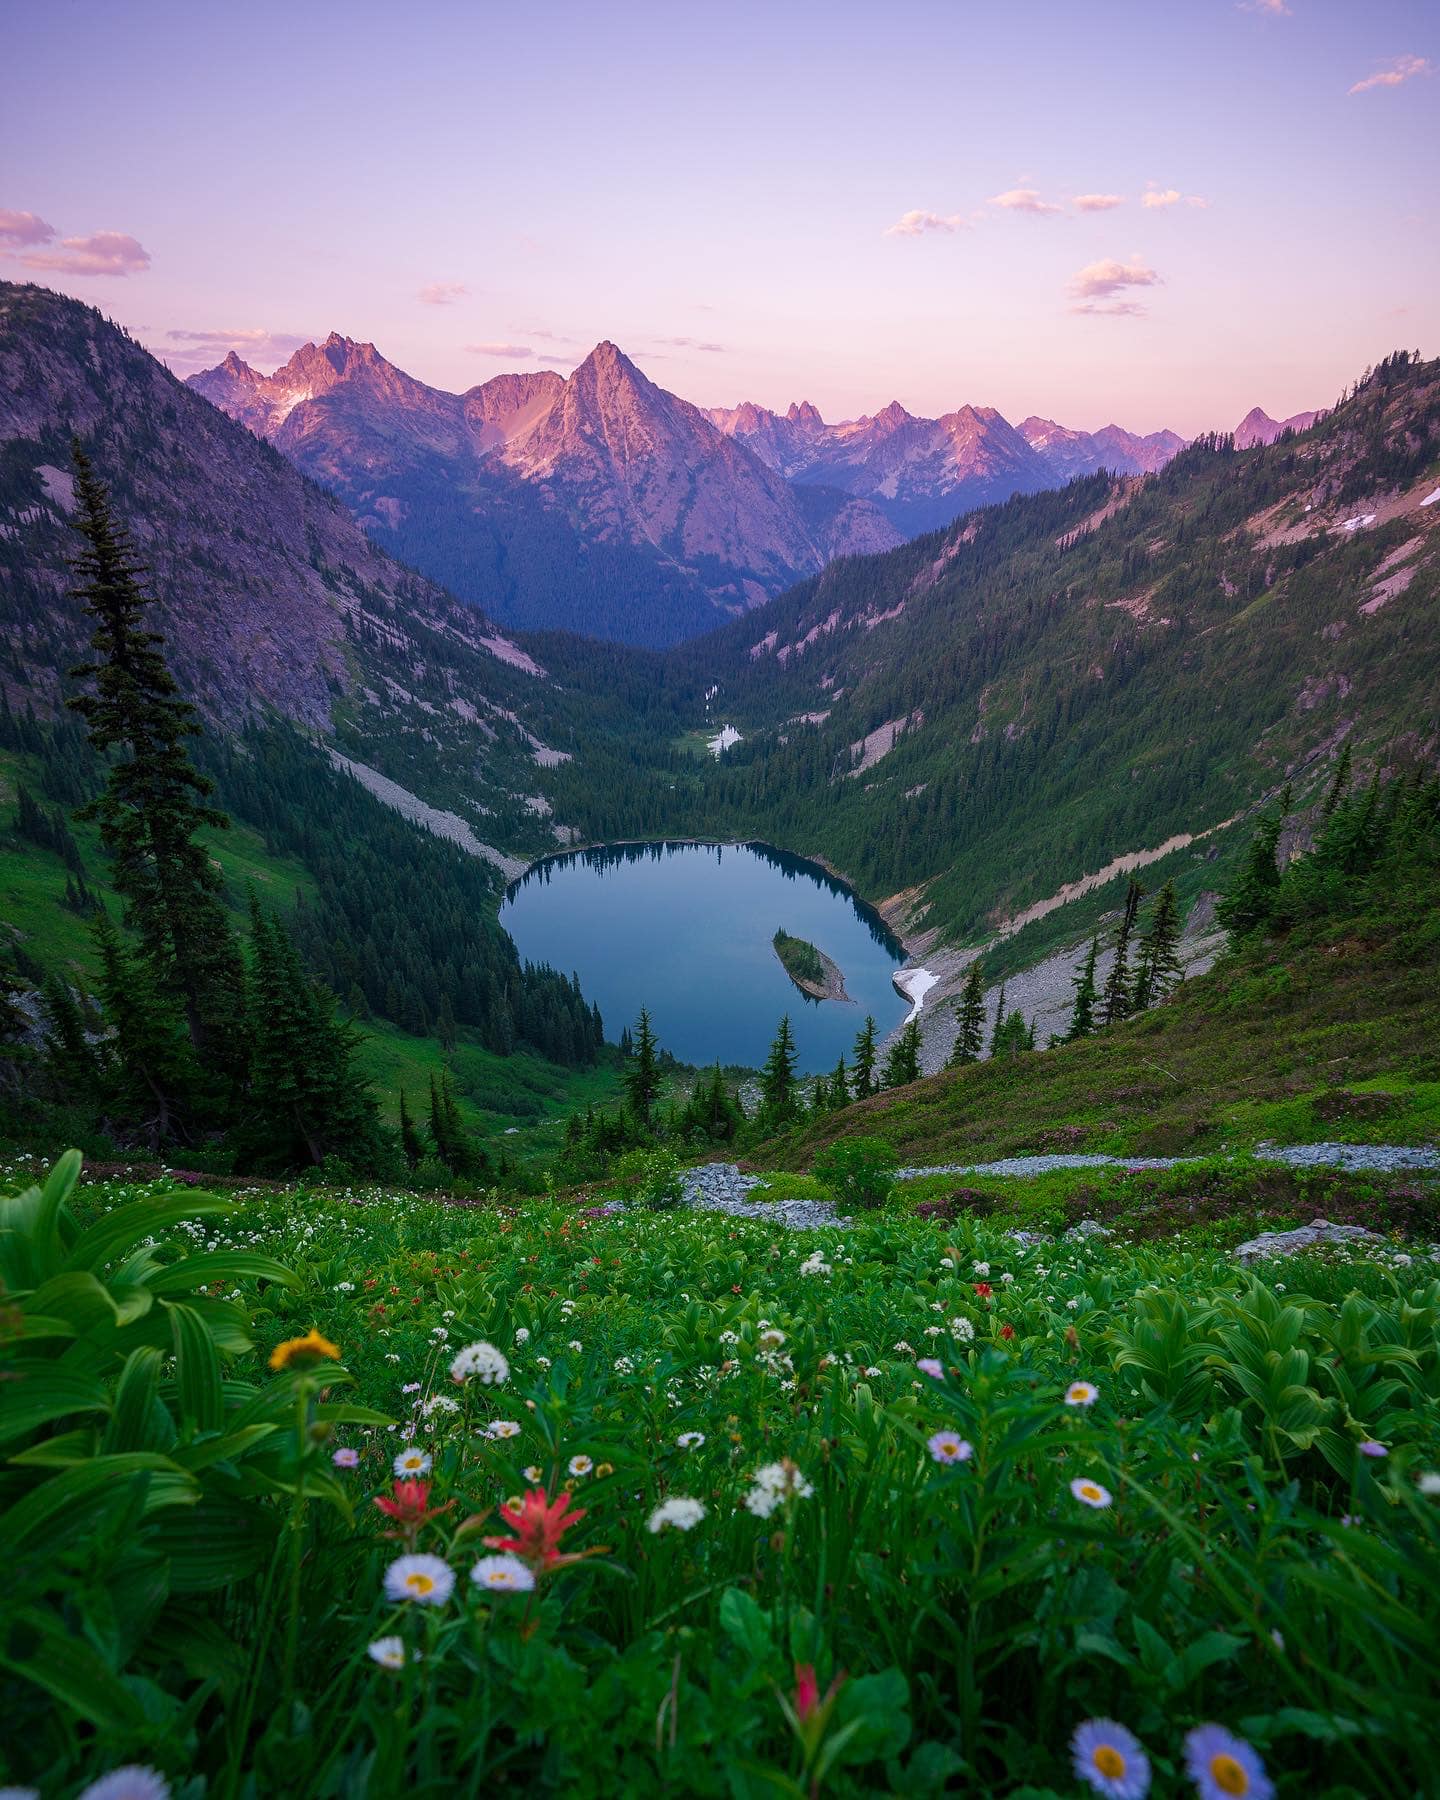 Summer in the North Cascades